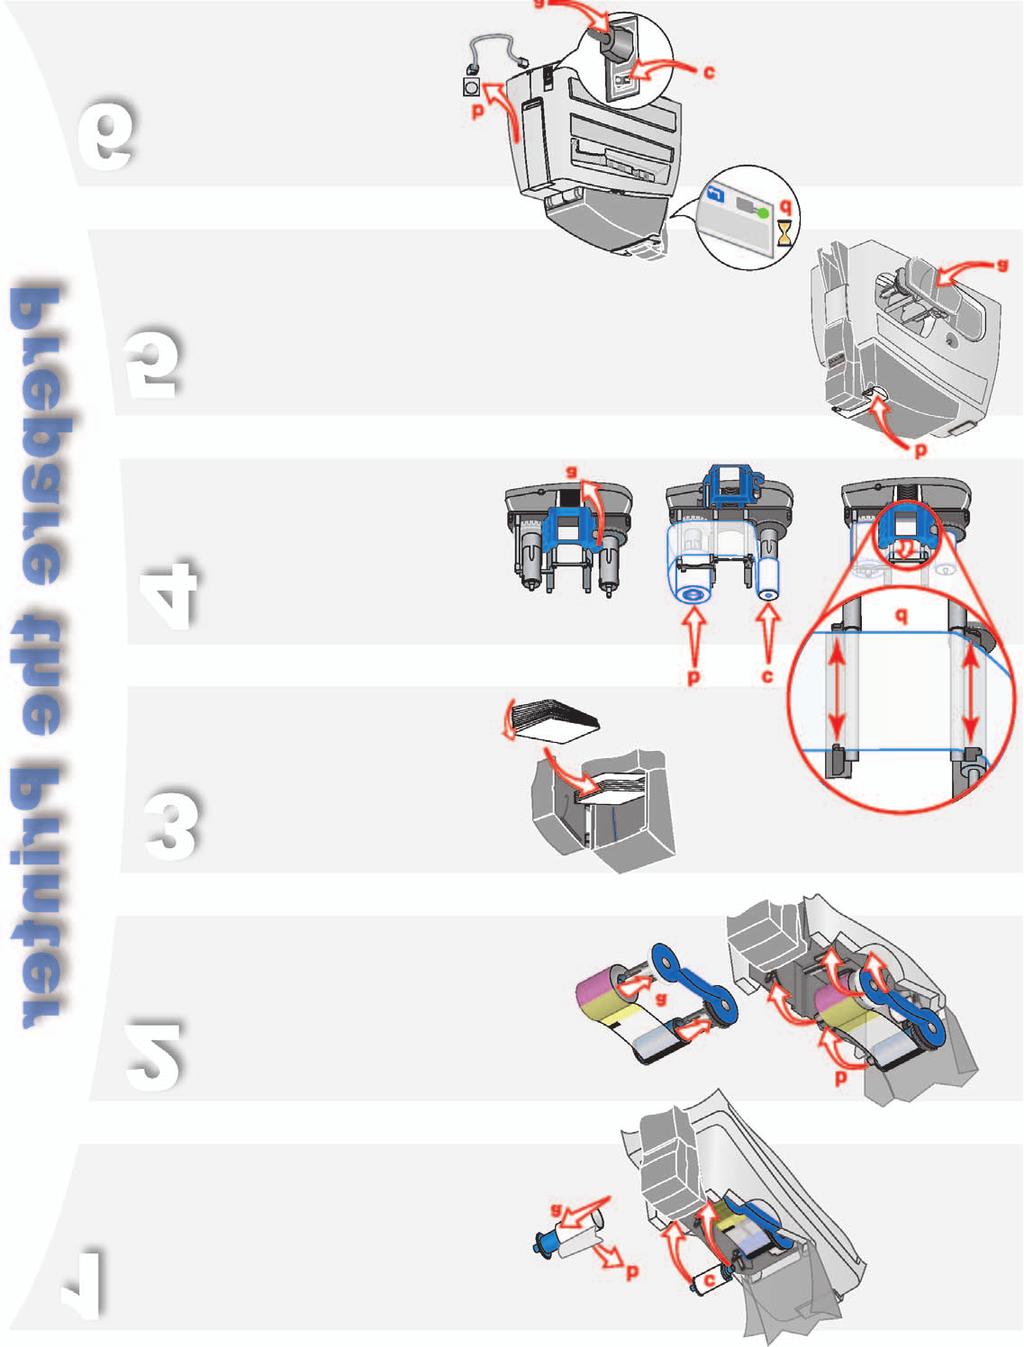 Open the printer cover. Slide the clening roller onto the clening sleeve (). Remove the protective wrp from the clening roller () nd instll the clening roller in the printer (c).